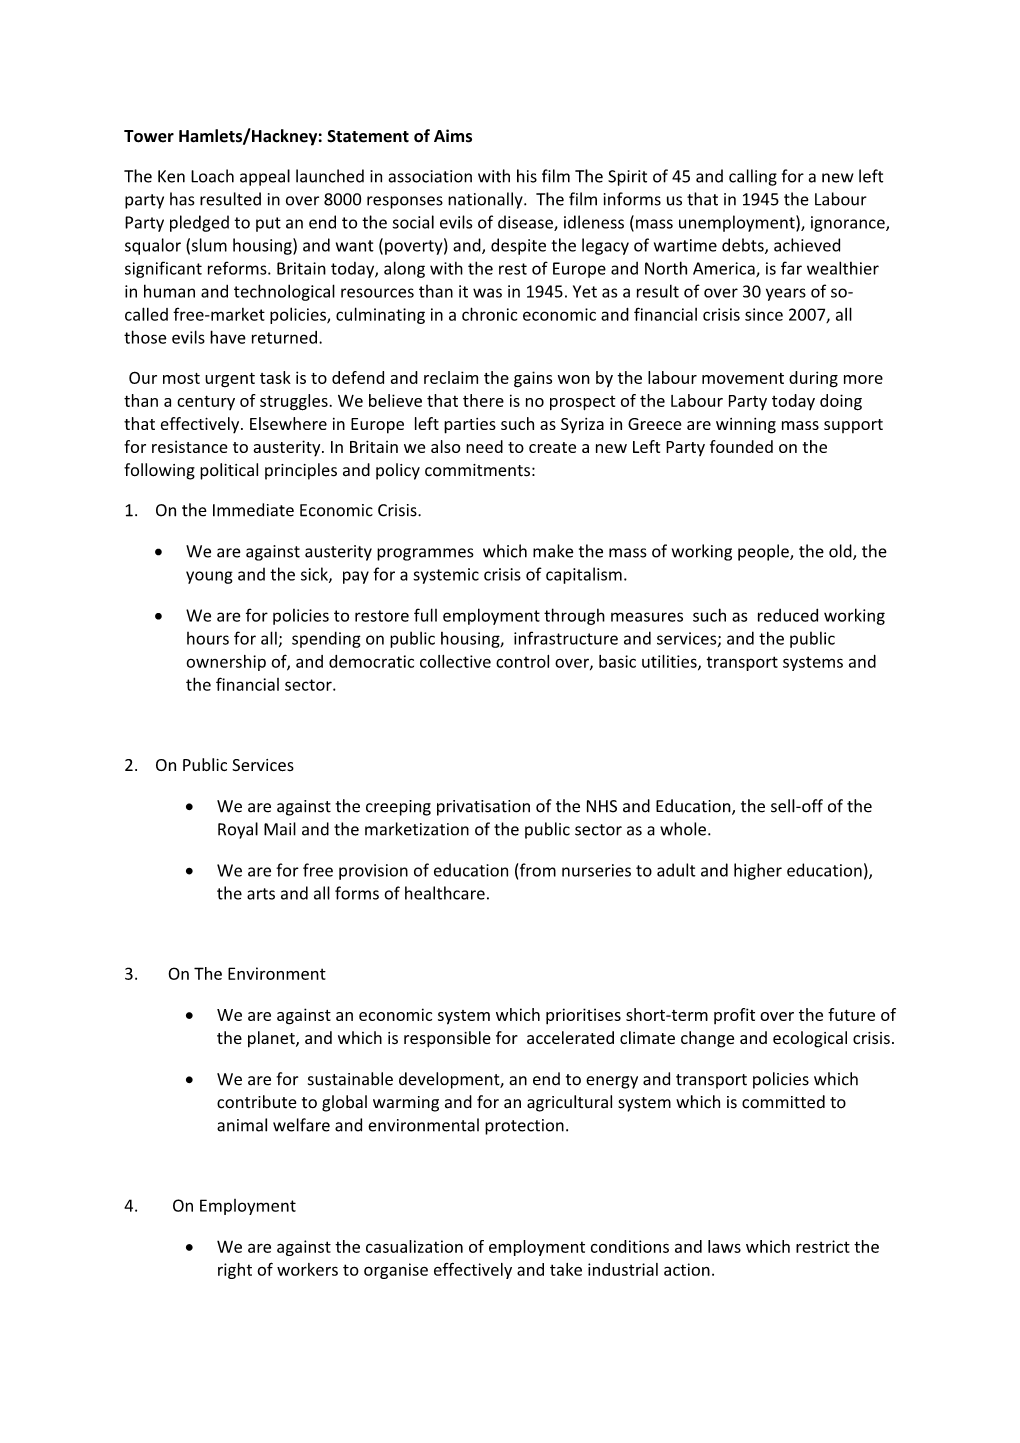 Tower Hamlets/Hackney: Statement of Aims